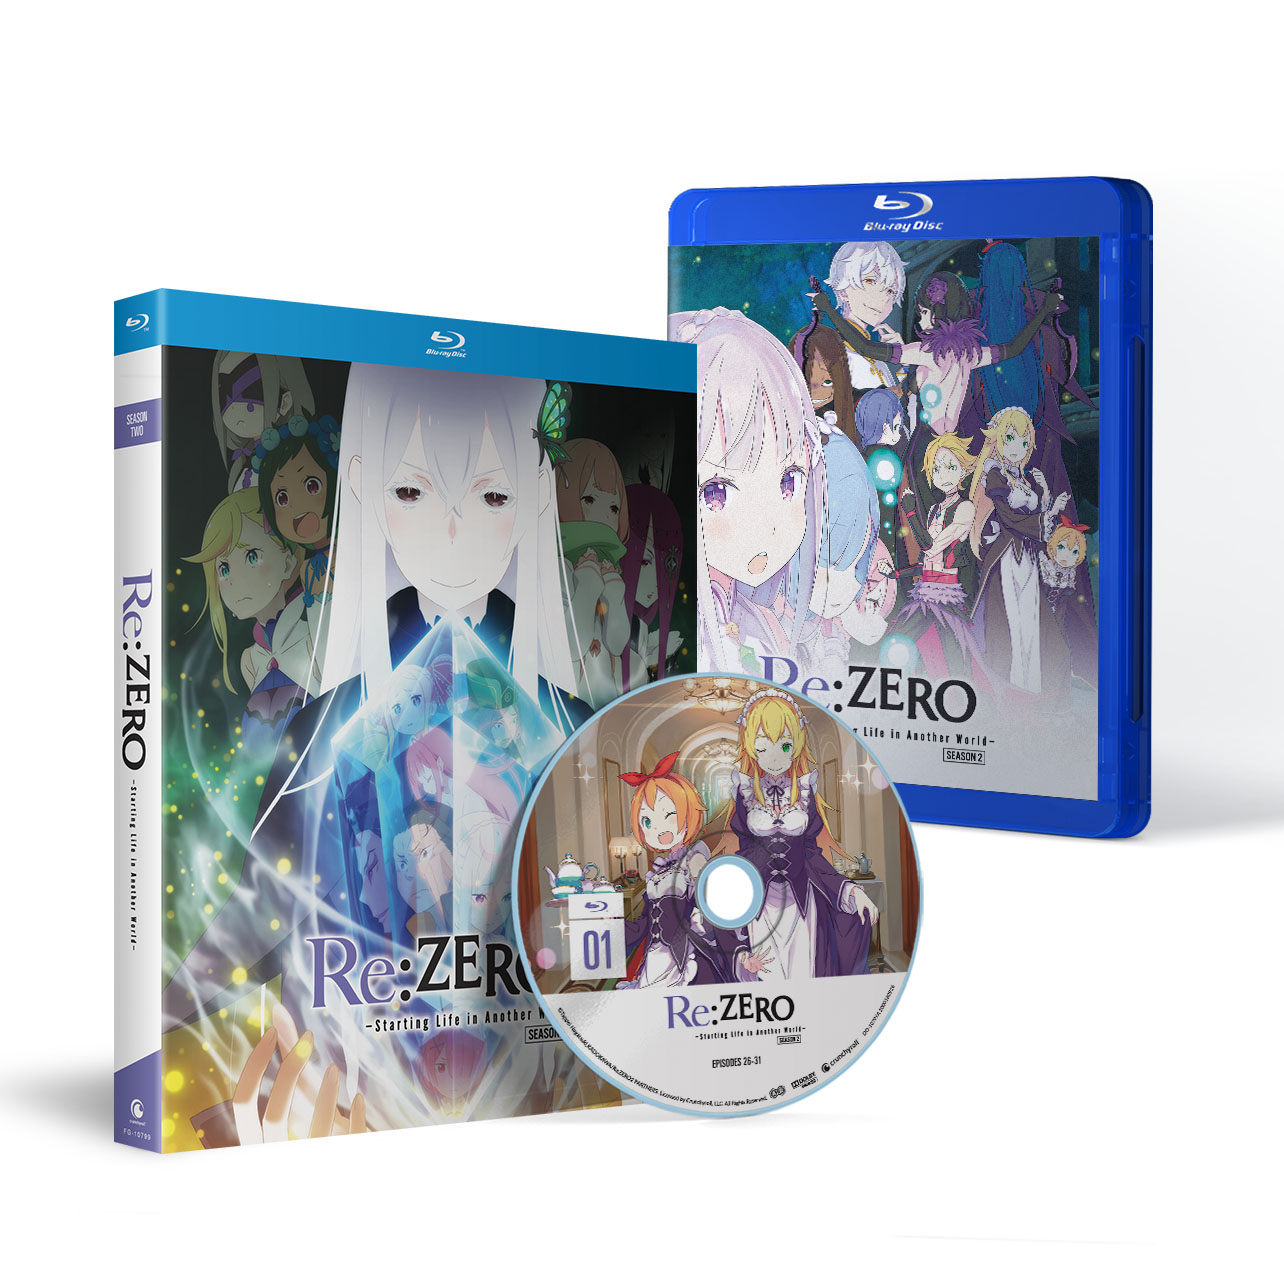 Re:ZERO -Starting Life in Another World- Season 2 - Blu-ray - Limited Edition image count 1